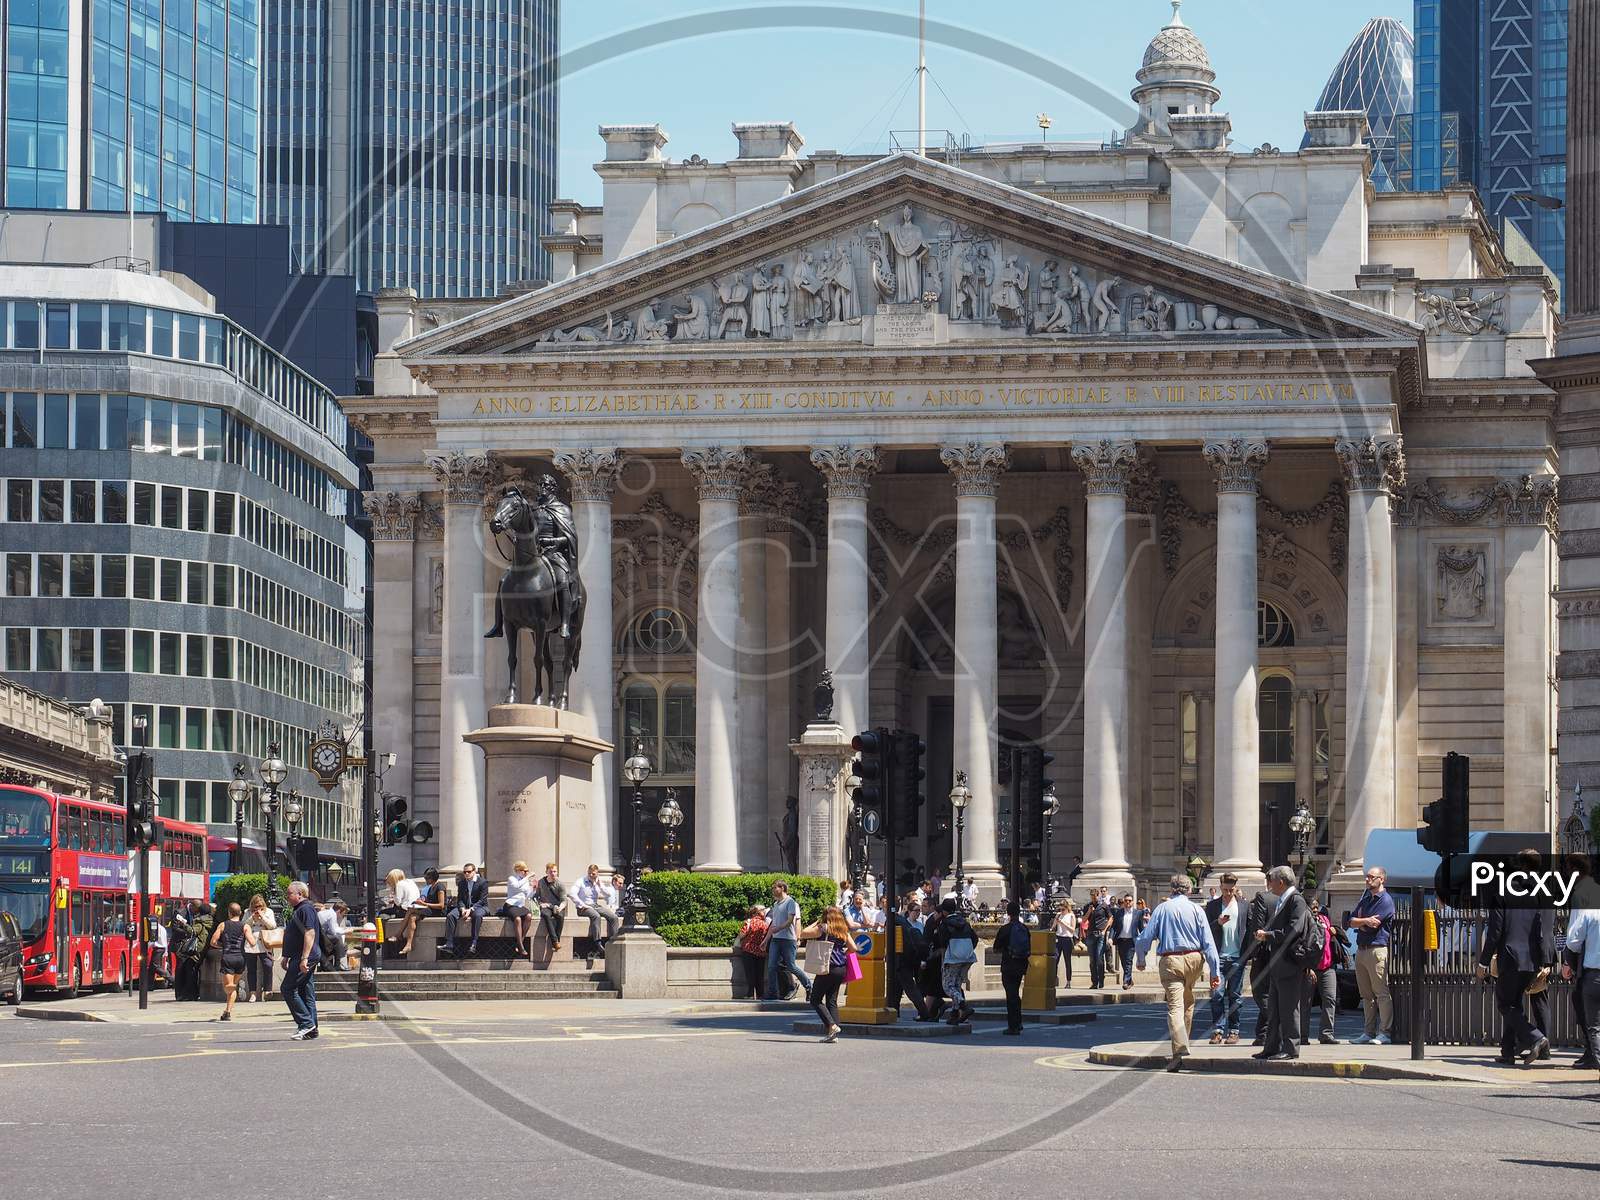 London, Uk - June 11, 2015: People In Front Of The Royal Stock Exchange